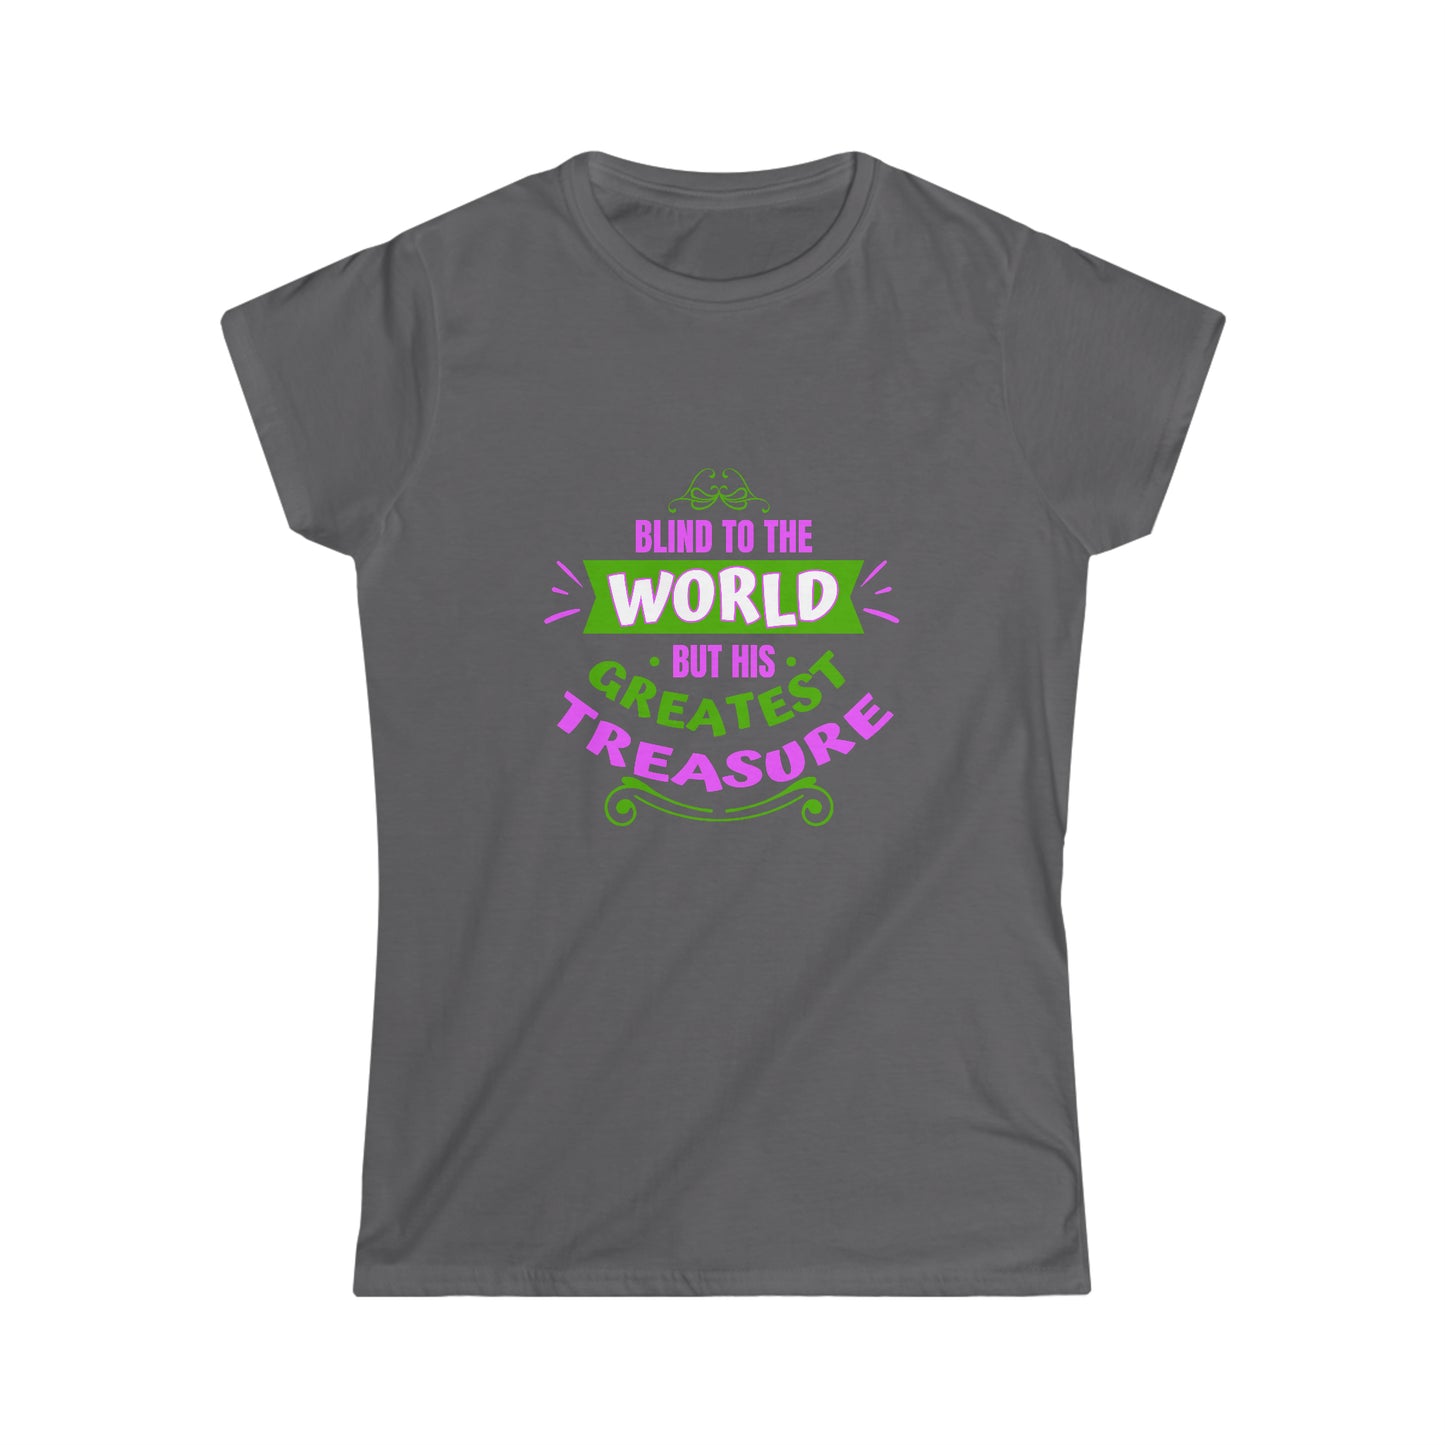 Blind To The World But His Greatest Treasure Women's T-shirt